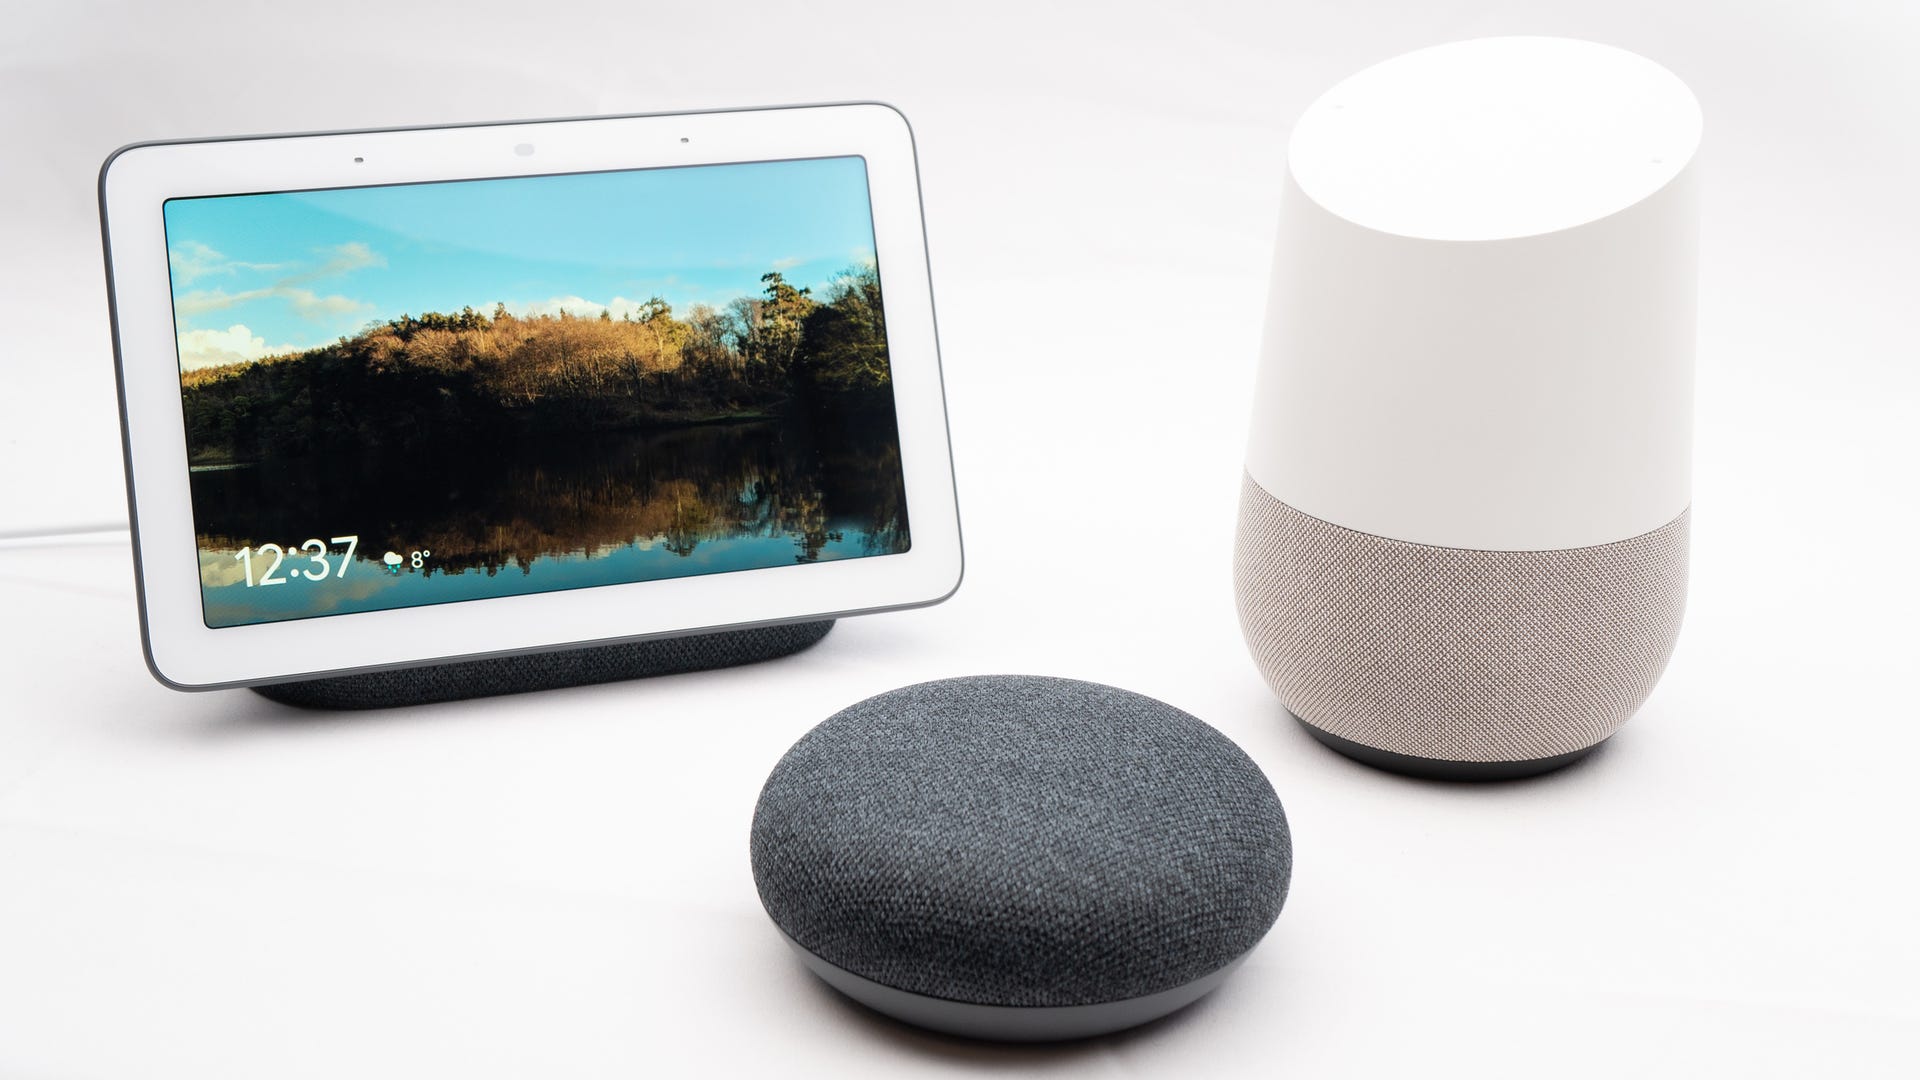 Google Home, Hub, Nest devices together on show in group.